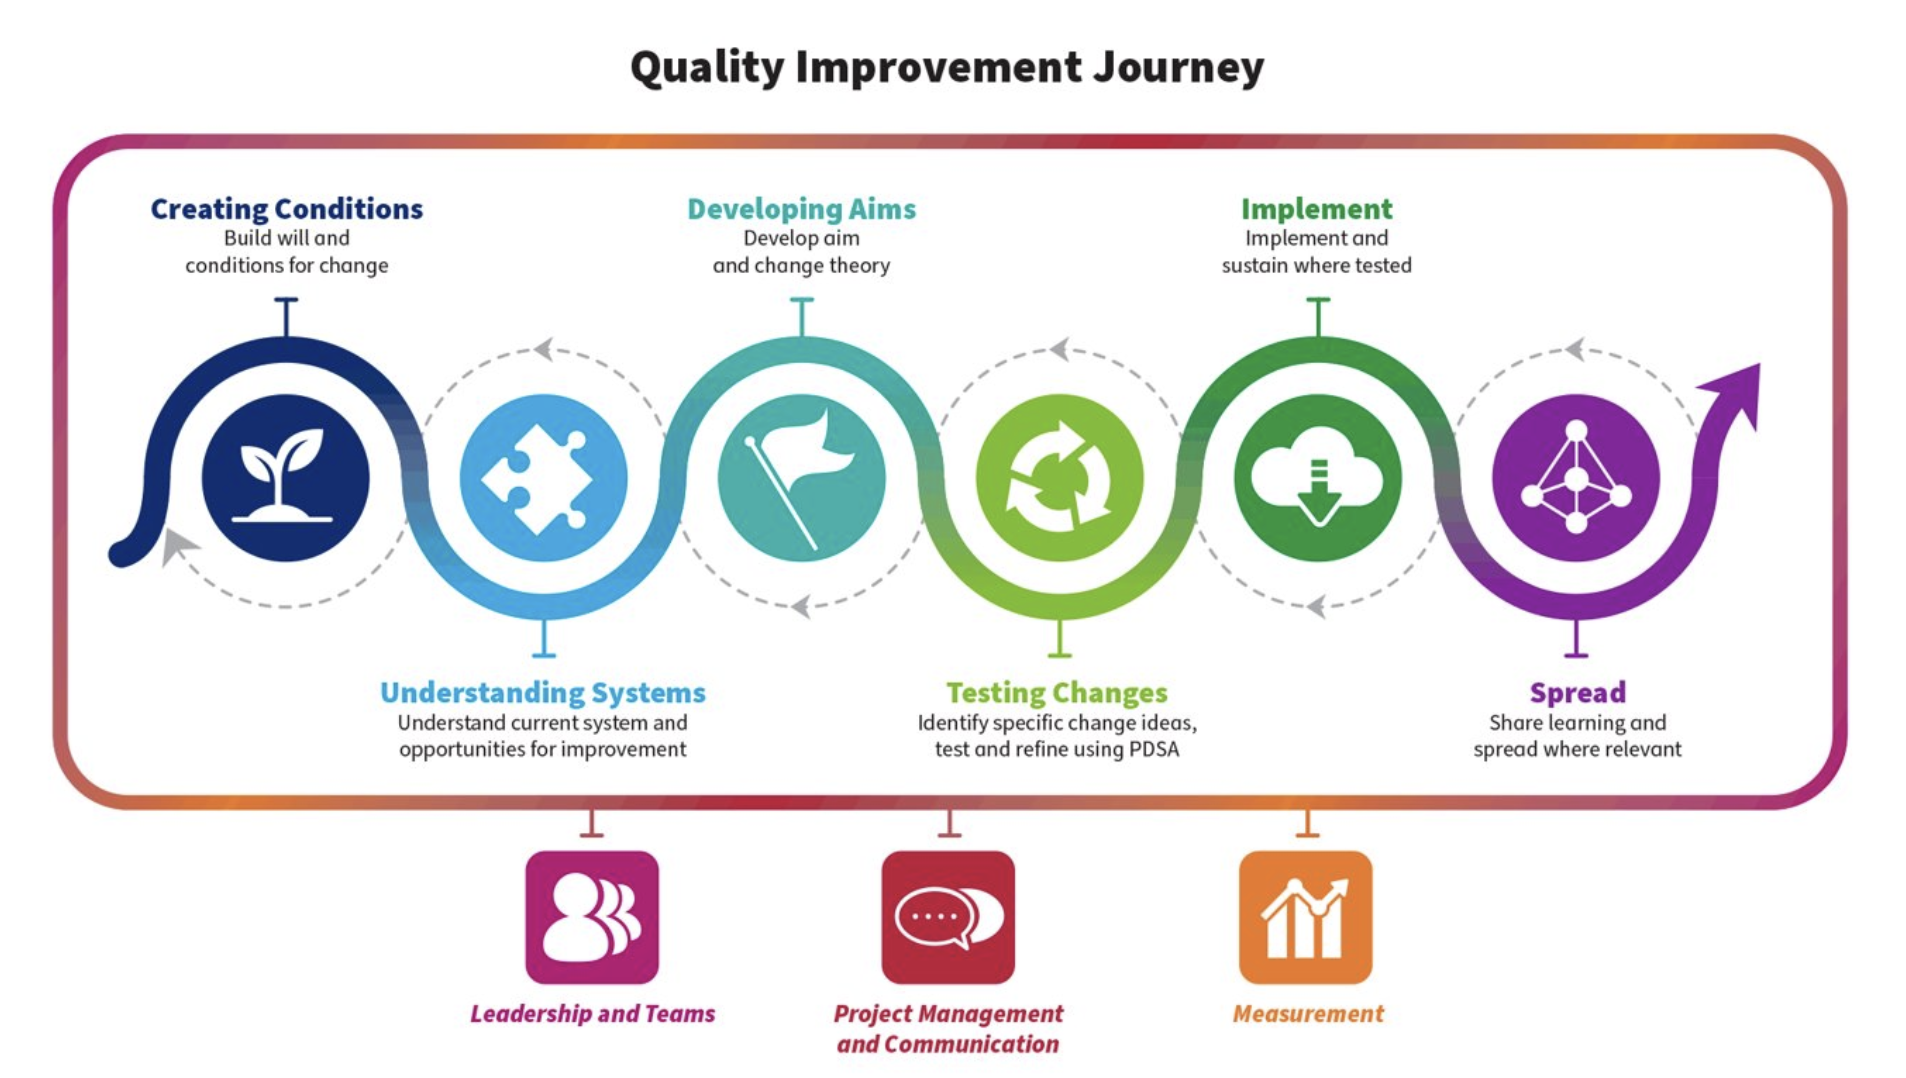 An image showing the six different stages in a typical, quality improvement journey of an improvement project. The stages are creating conditions, understanding systems, developing aims, testing changes, implement and spread. Arrows in the image indicate that this is not likely to be a one-way, linear journey. Those involved are likely to move back as well as forward and to work on different aspects of the quality improvement journey at the same time throughout the project.